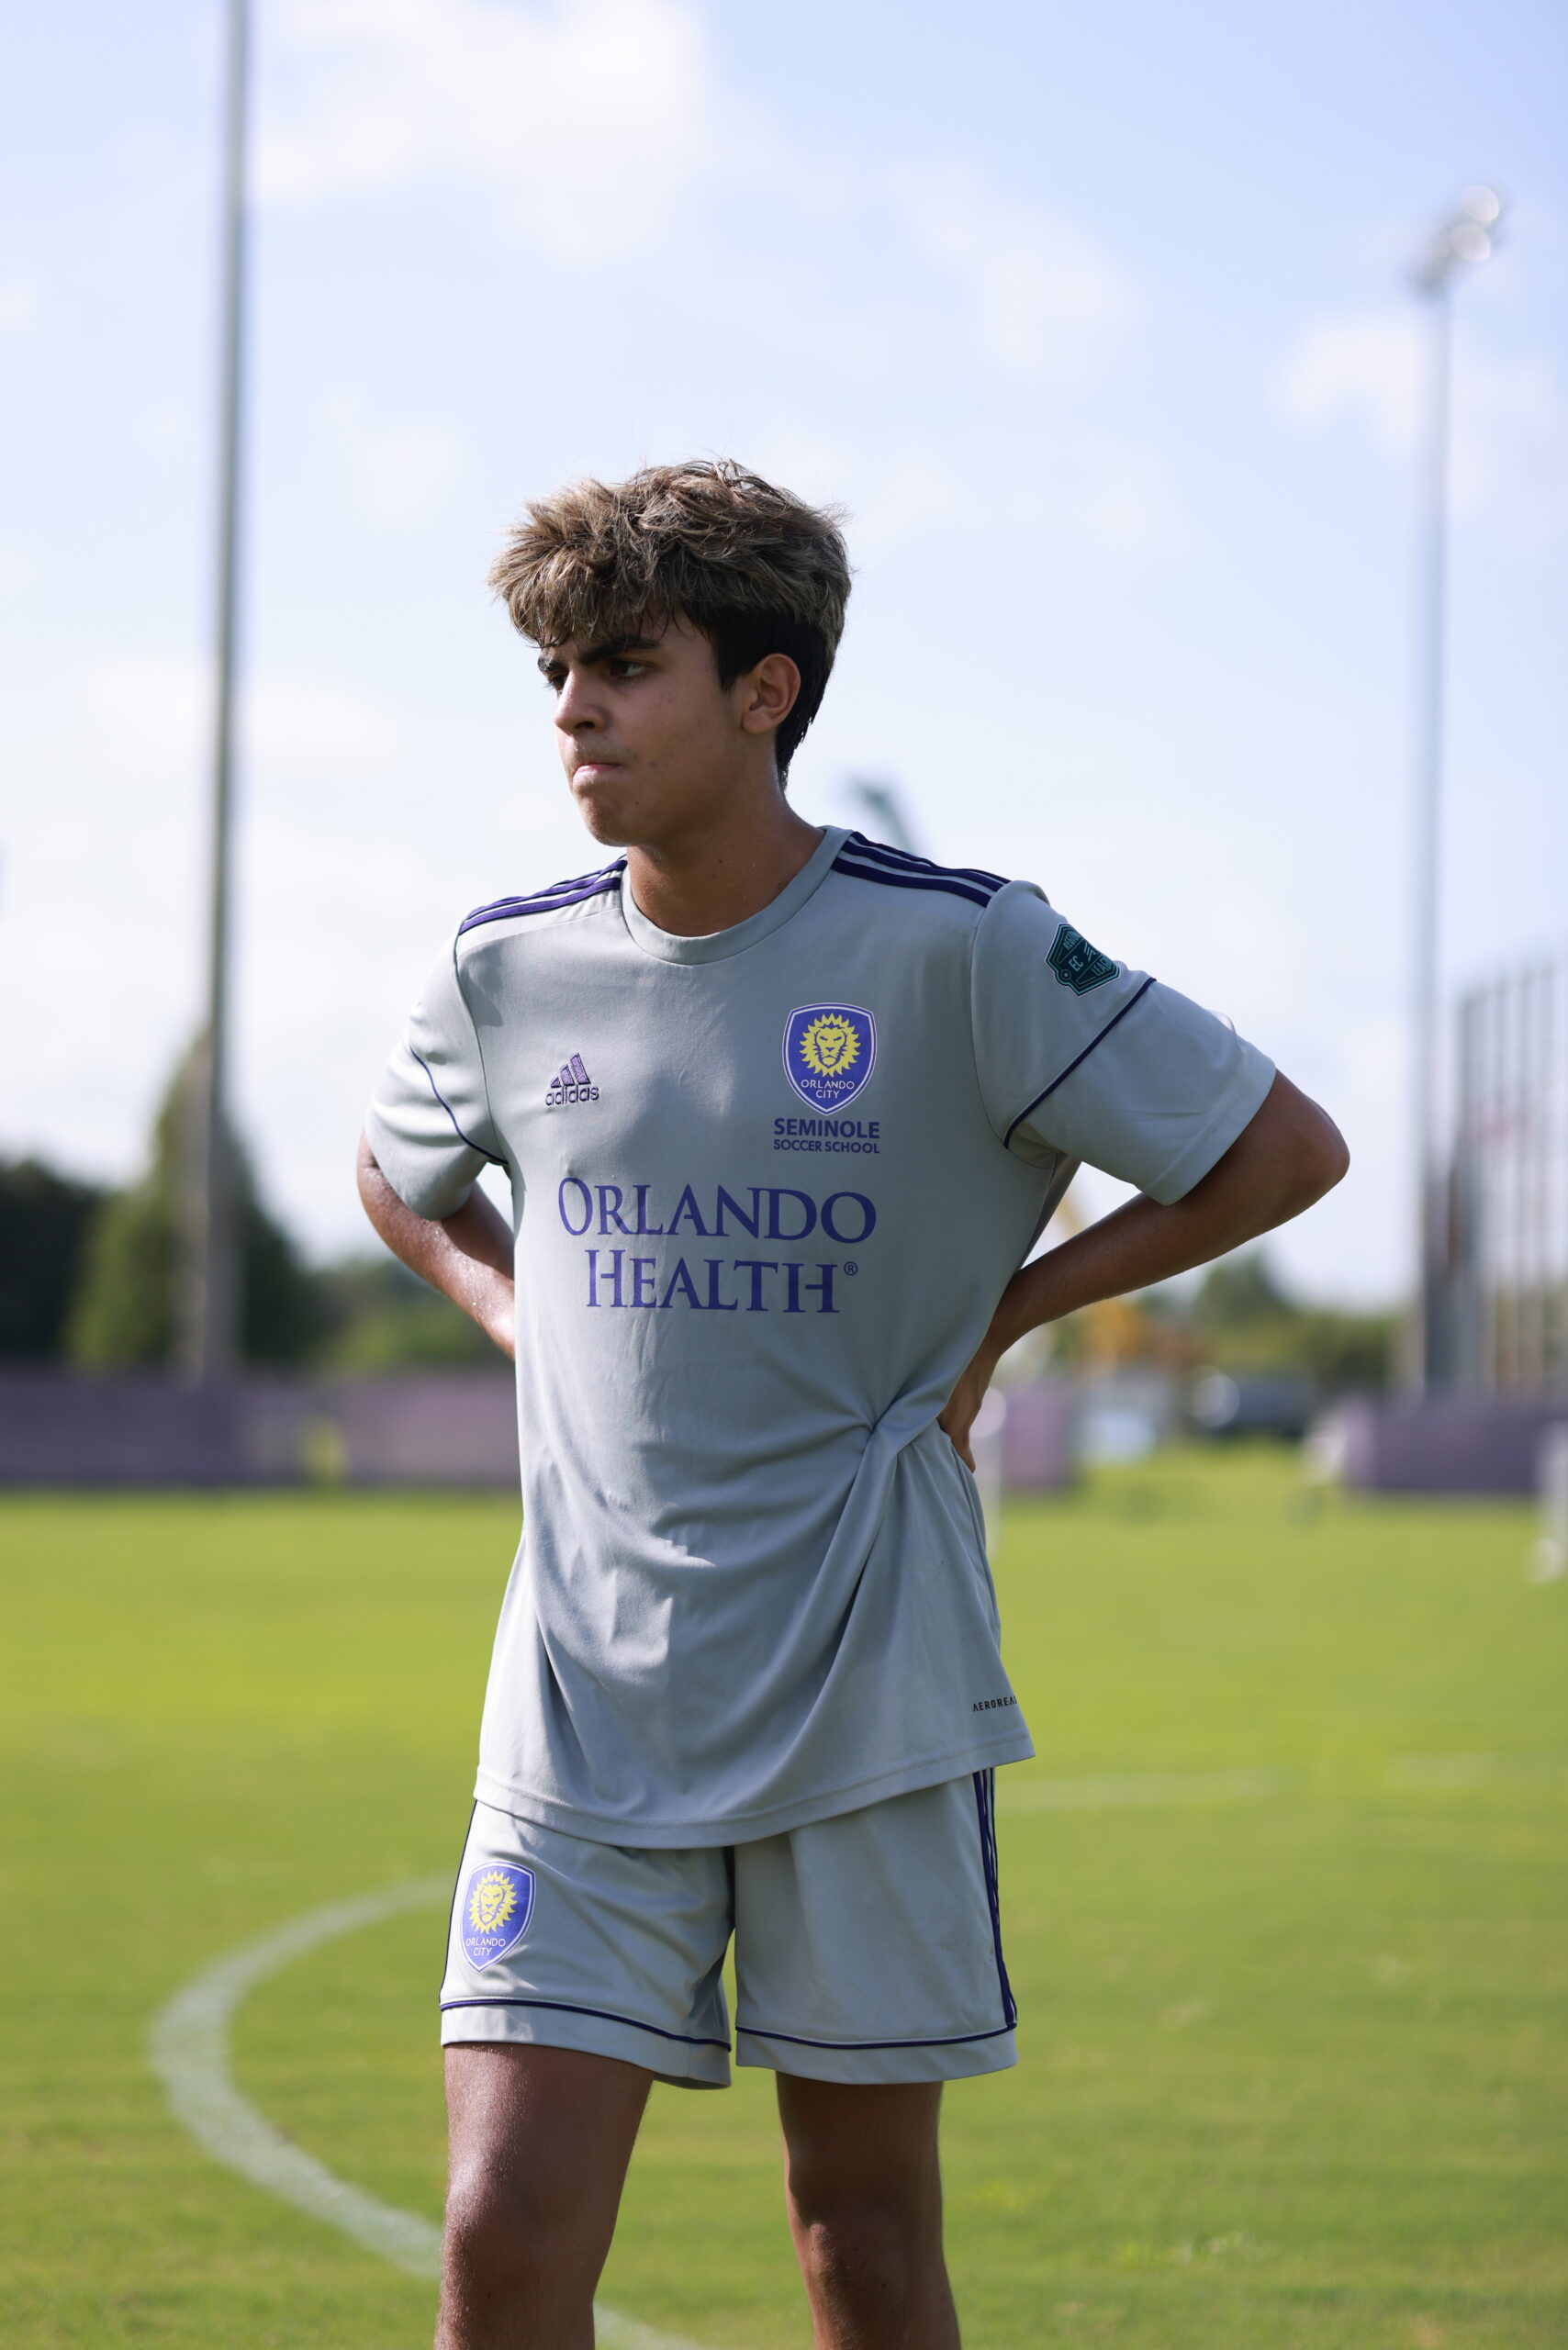 A soccer player in a light gray uniform with the logo "Orlando Health" stands on the Orlando City Campus' grassy field with hands on hips, looking to the side under a sunny sky.